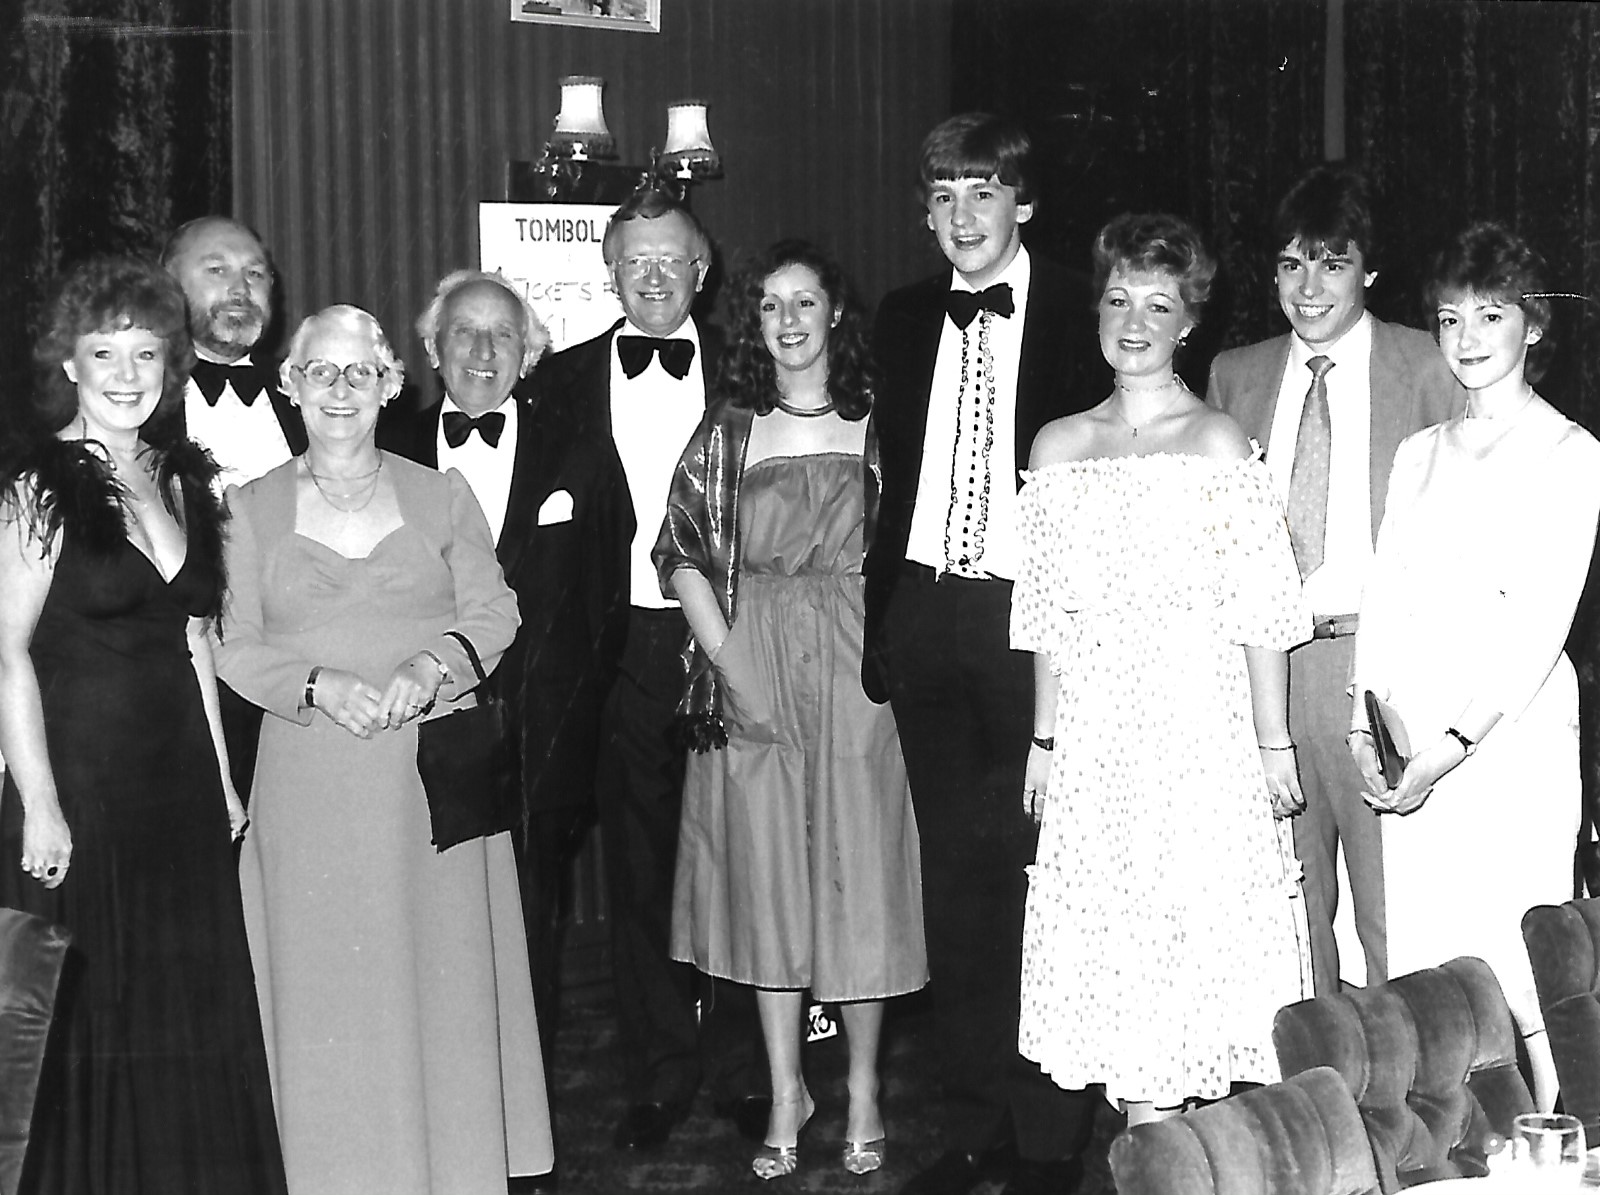 Guests enjoy the annual Southport Rugby Football Club Ball in Southport in May 1982